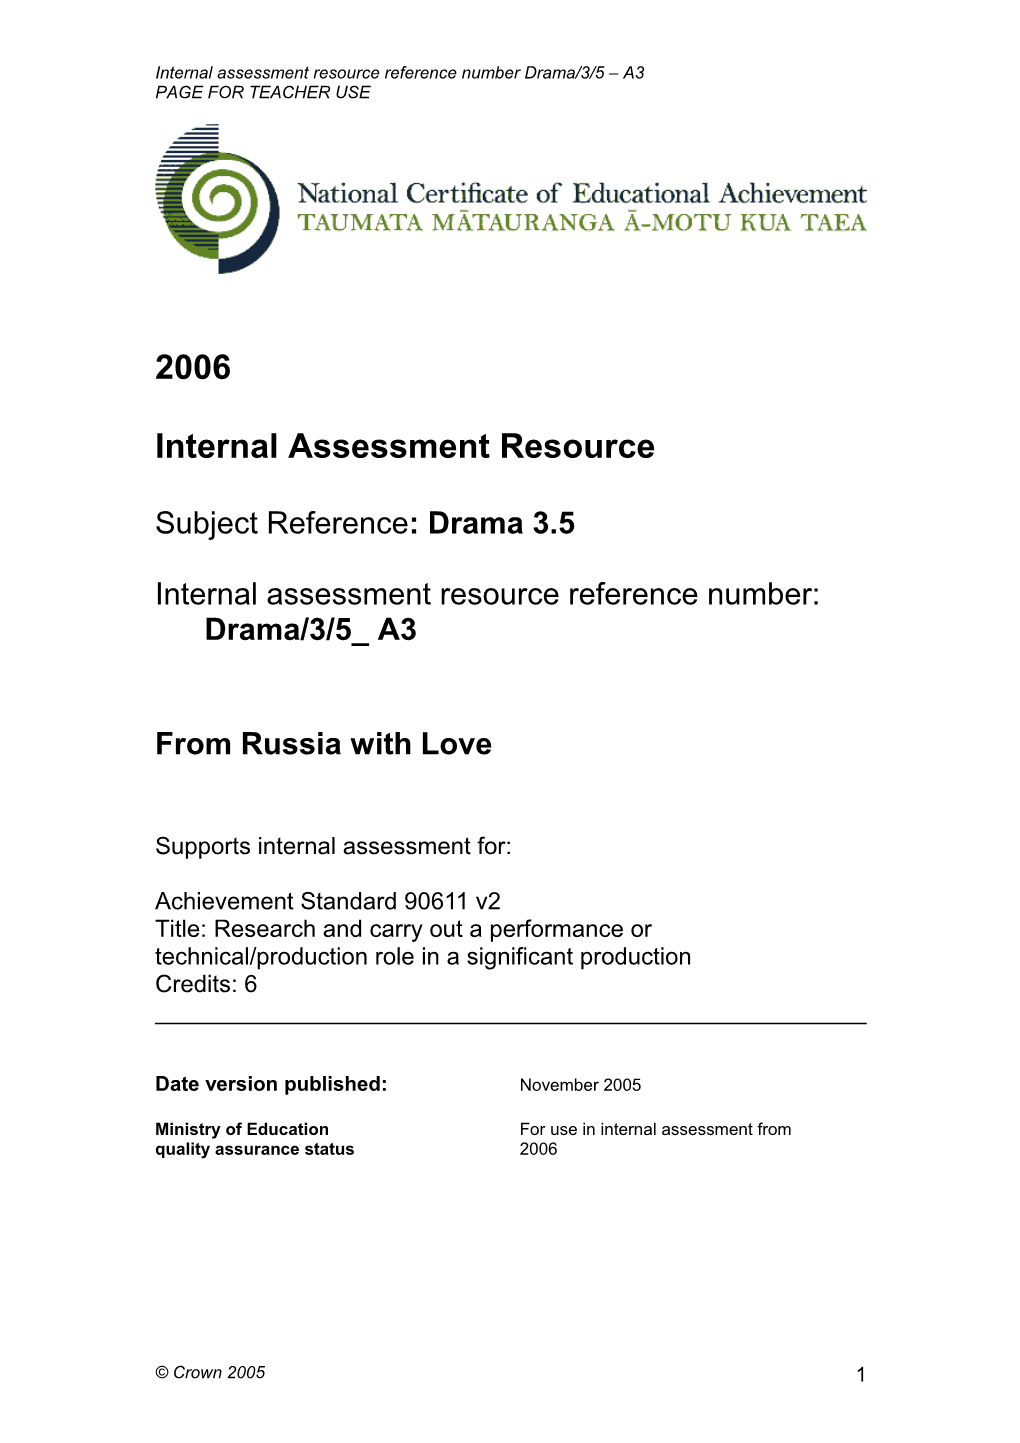 Internal Assessment Resource Reference Number Drama/3/5 A3